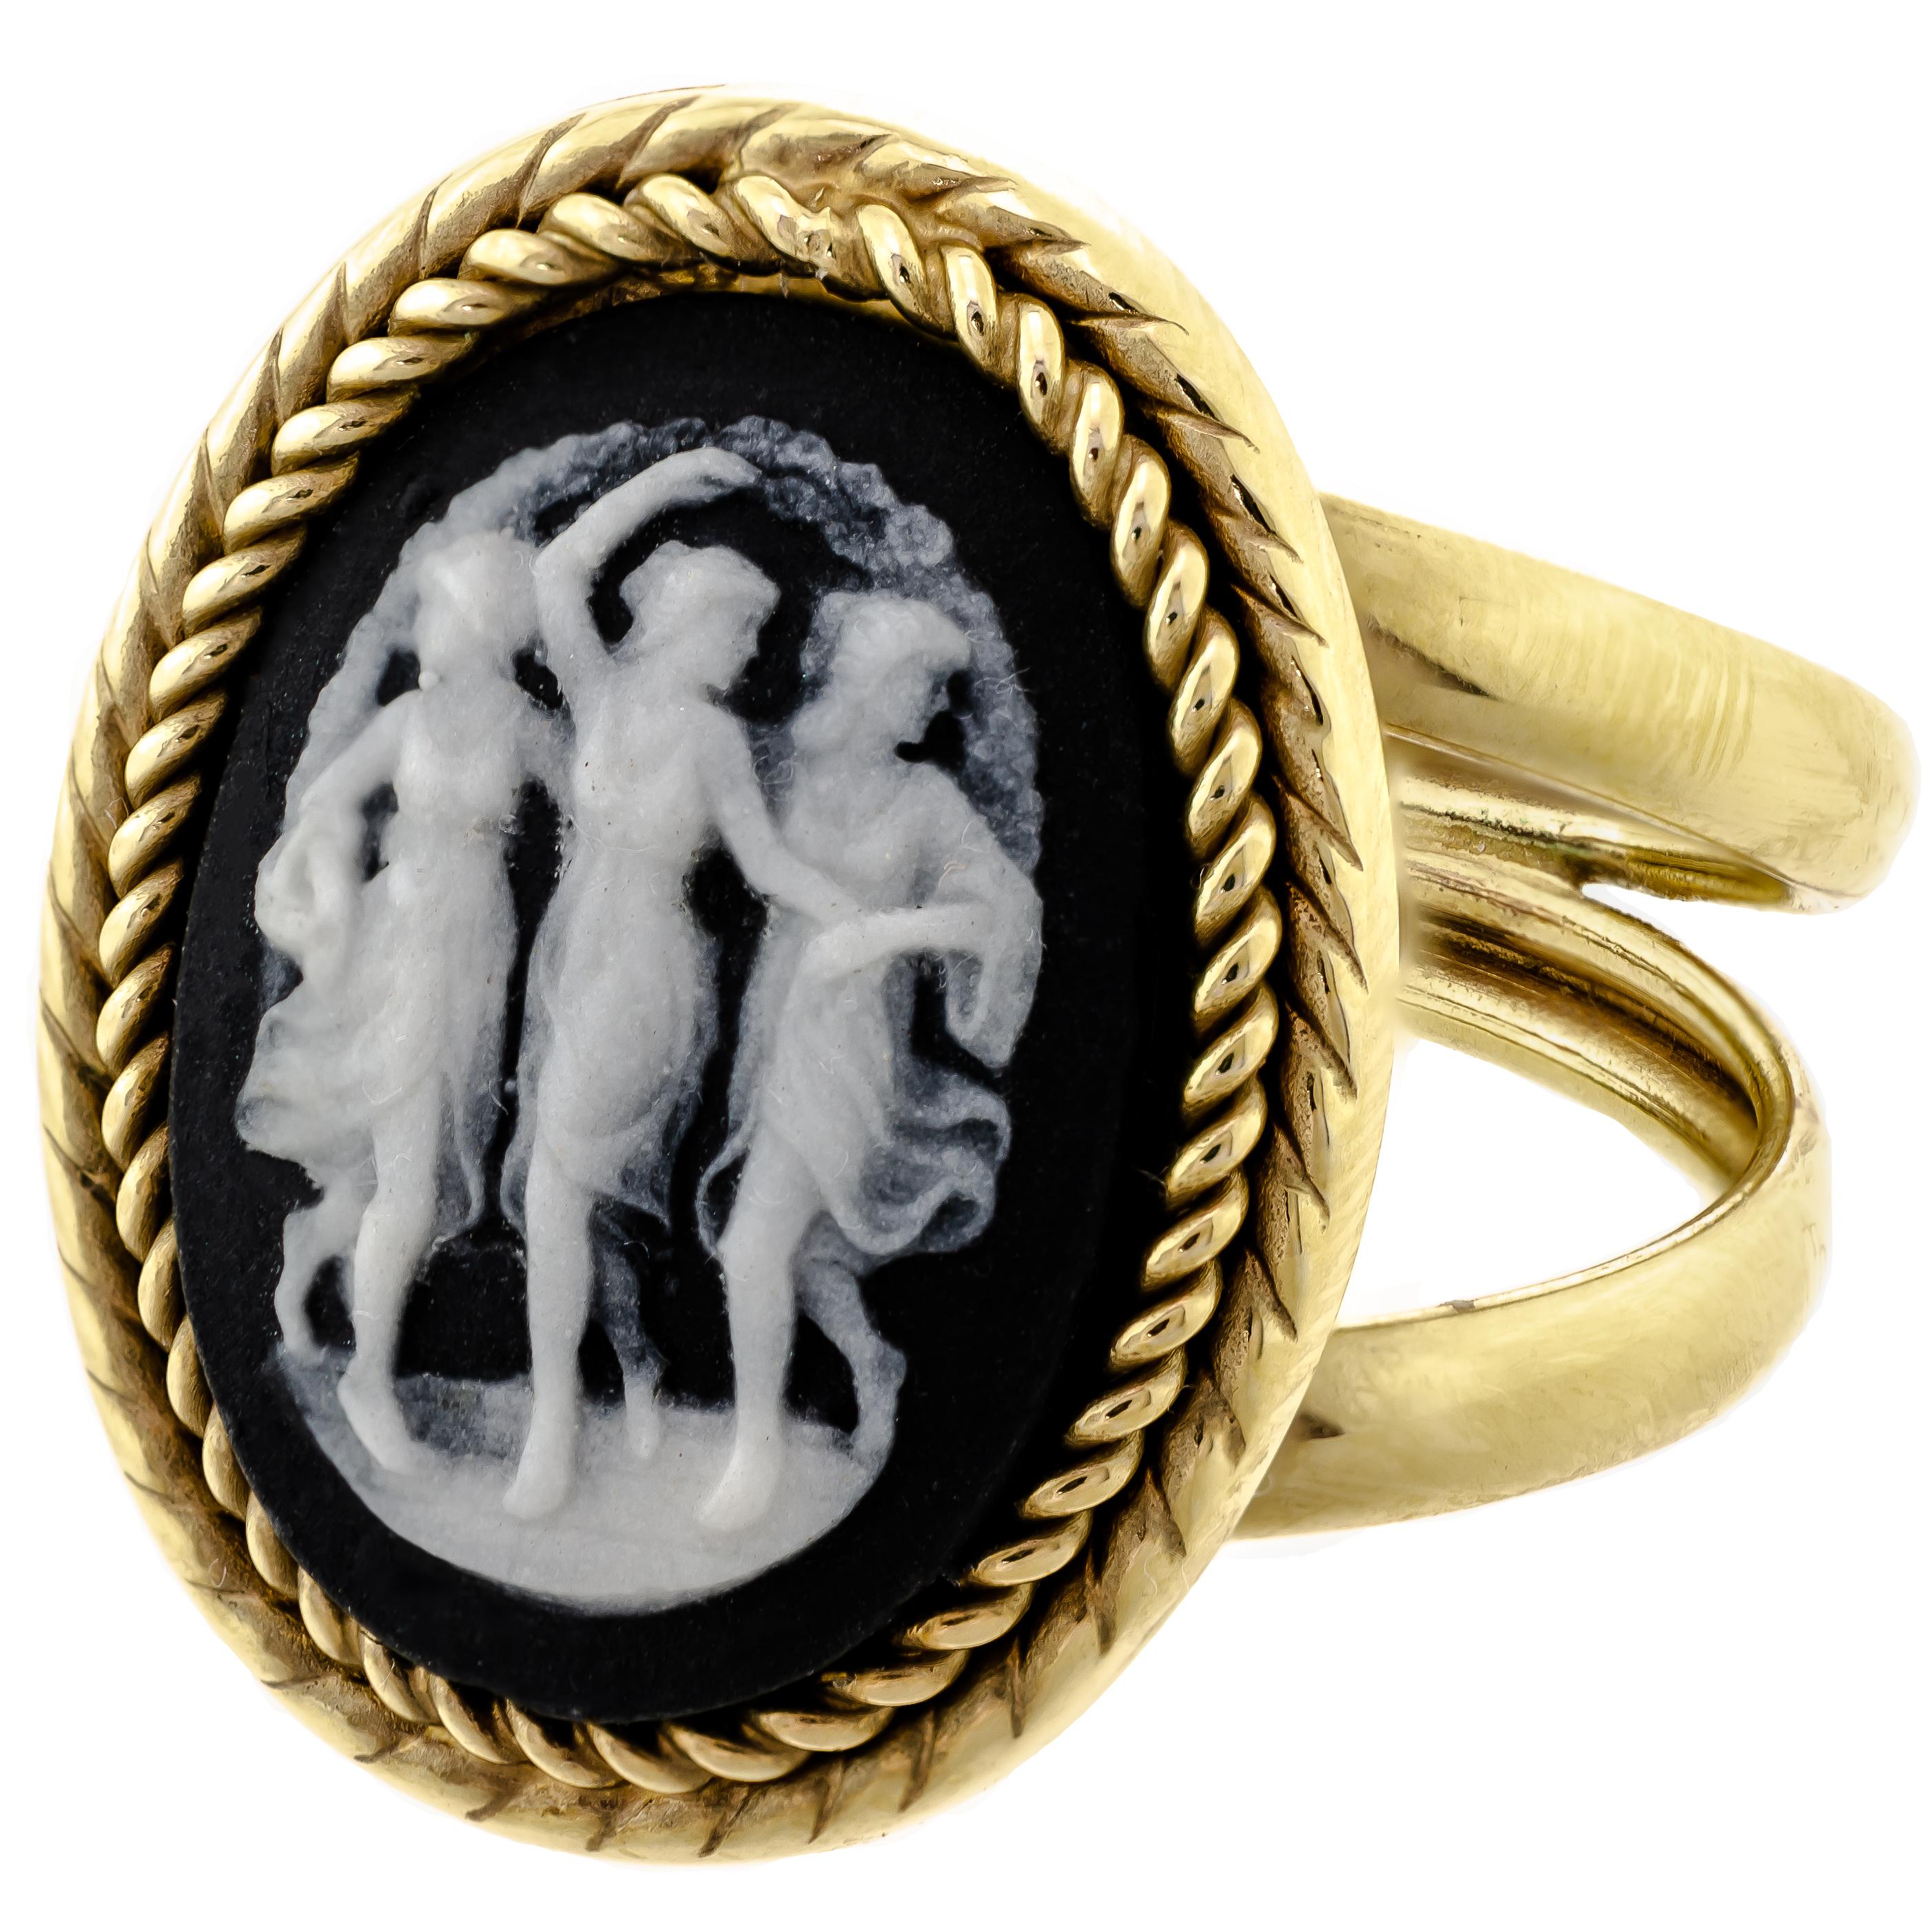 This charming vintage three graces black and white Wedgwood cameo of the oval shape measuring approximately 16.7mm by 12mm bezel set into a 14kt yellow gold twisted rope border double shank ring mount. Touchmarks 14kt, Italy, ZRW Maker's Mark in a